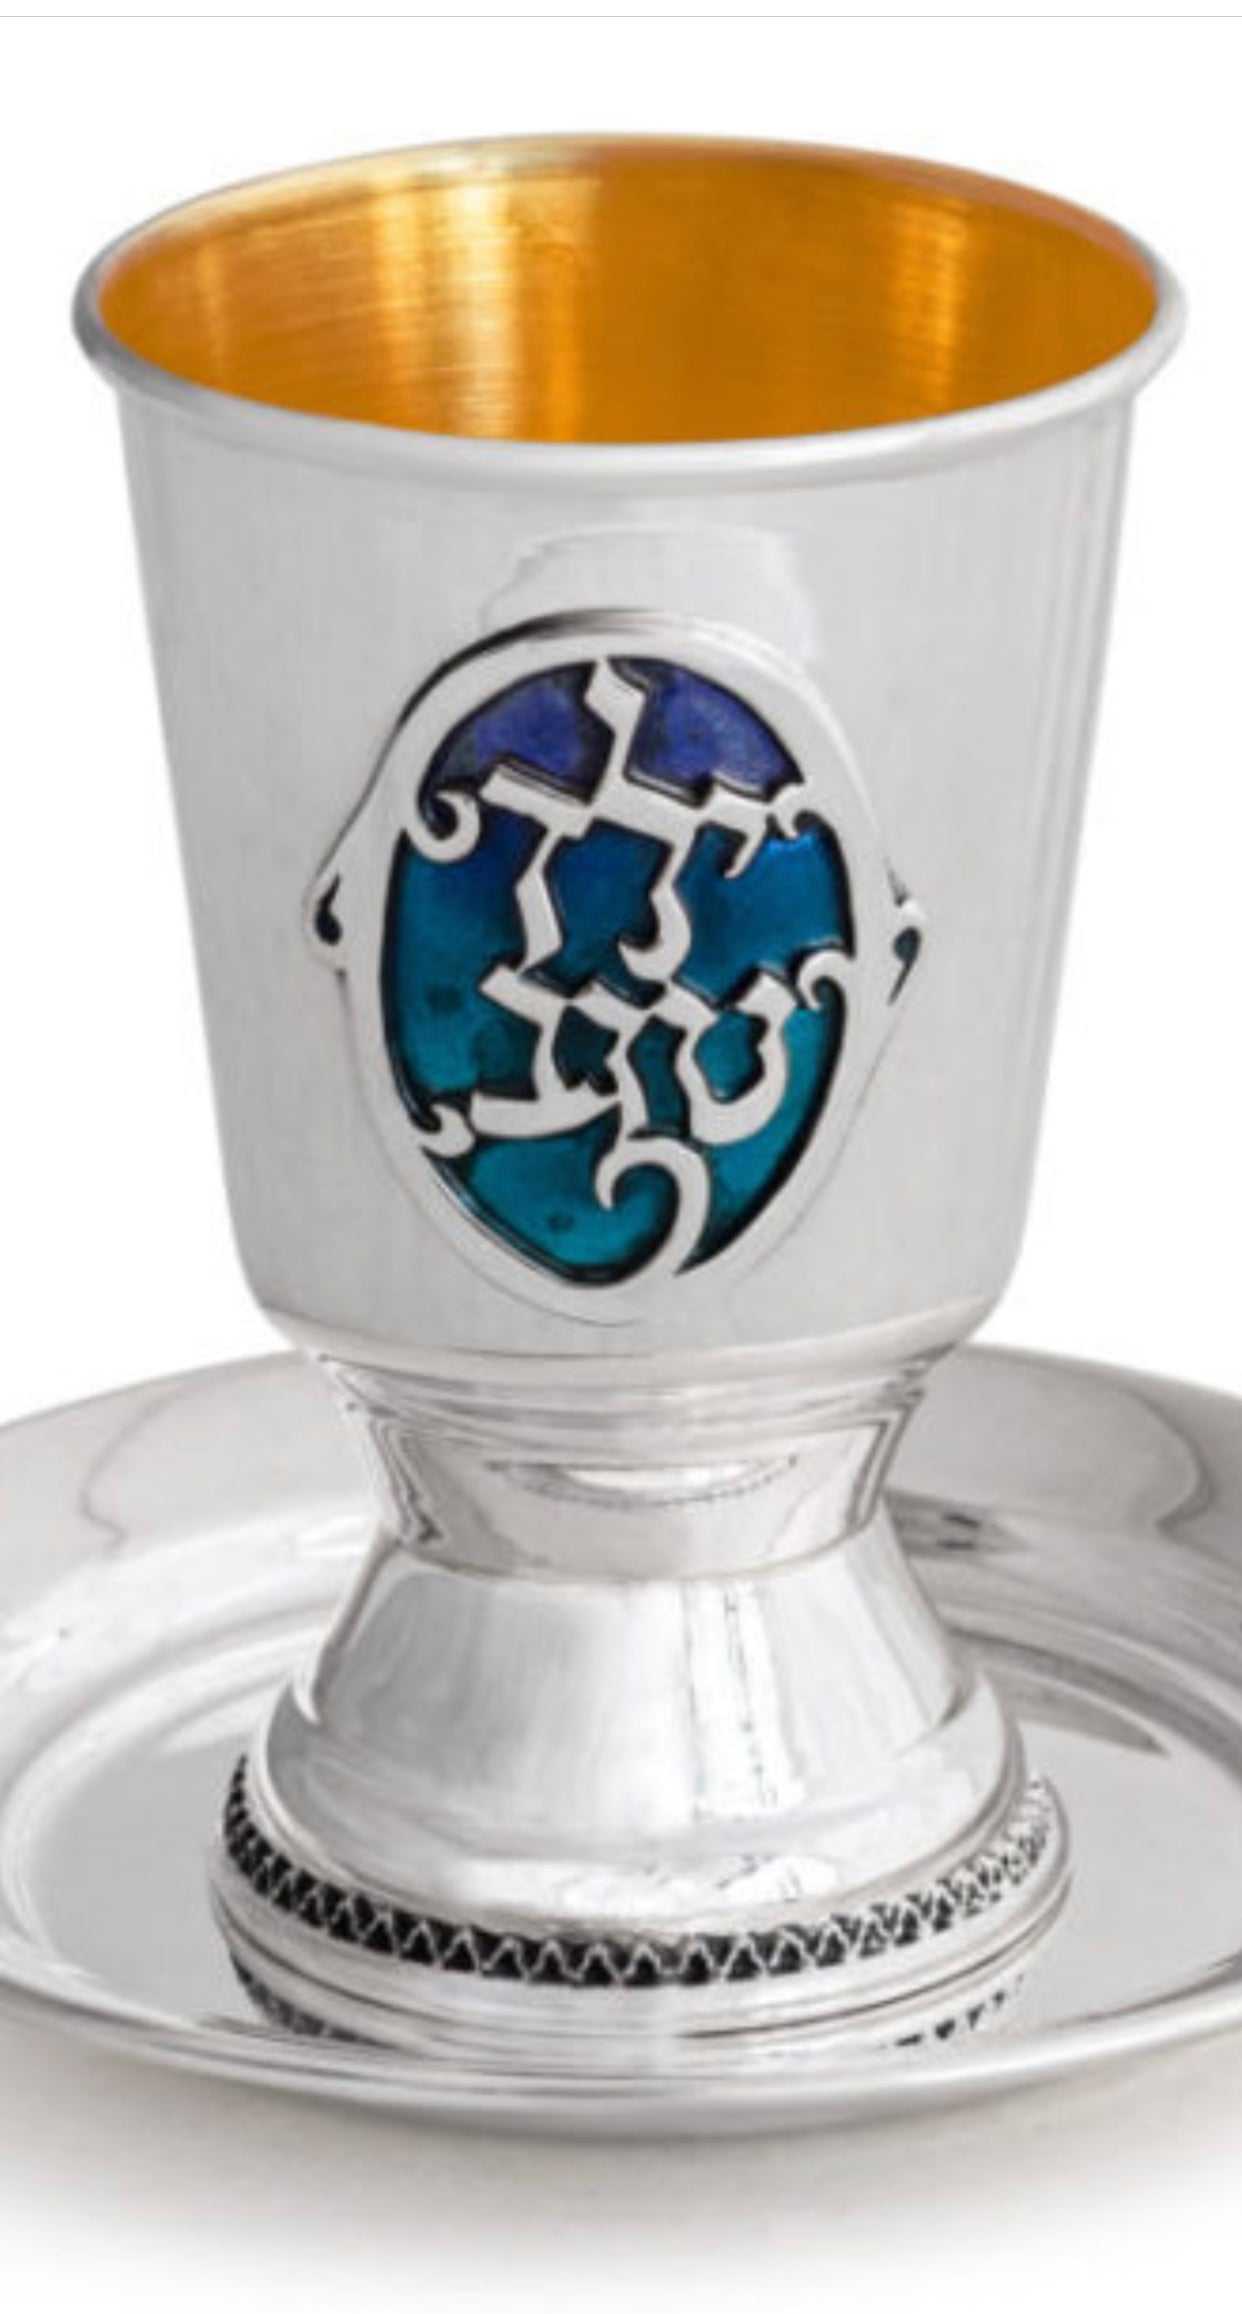 Yeled Tov Cup with Enamel